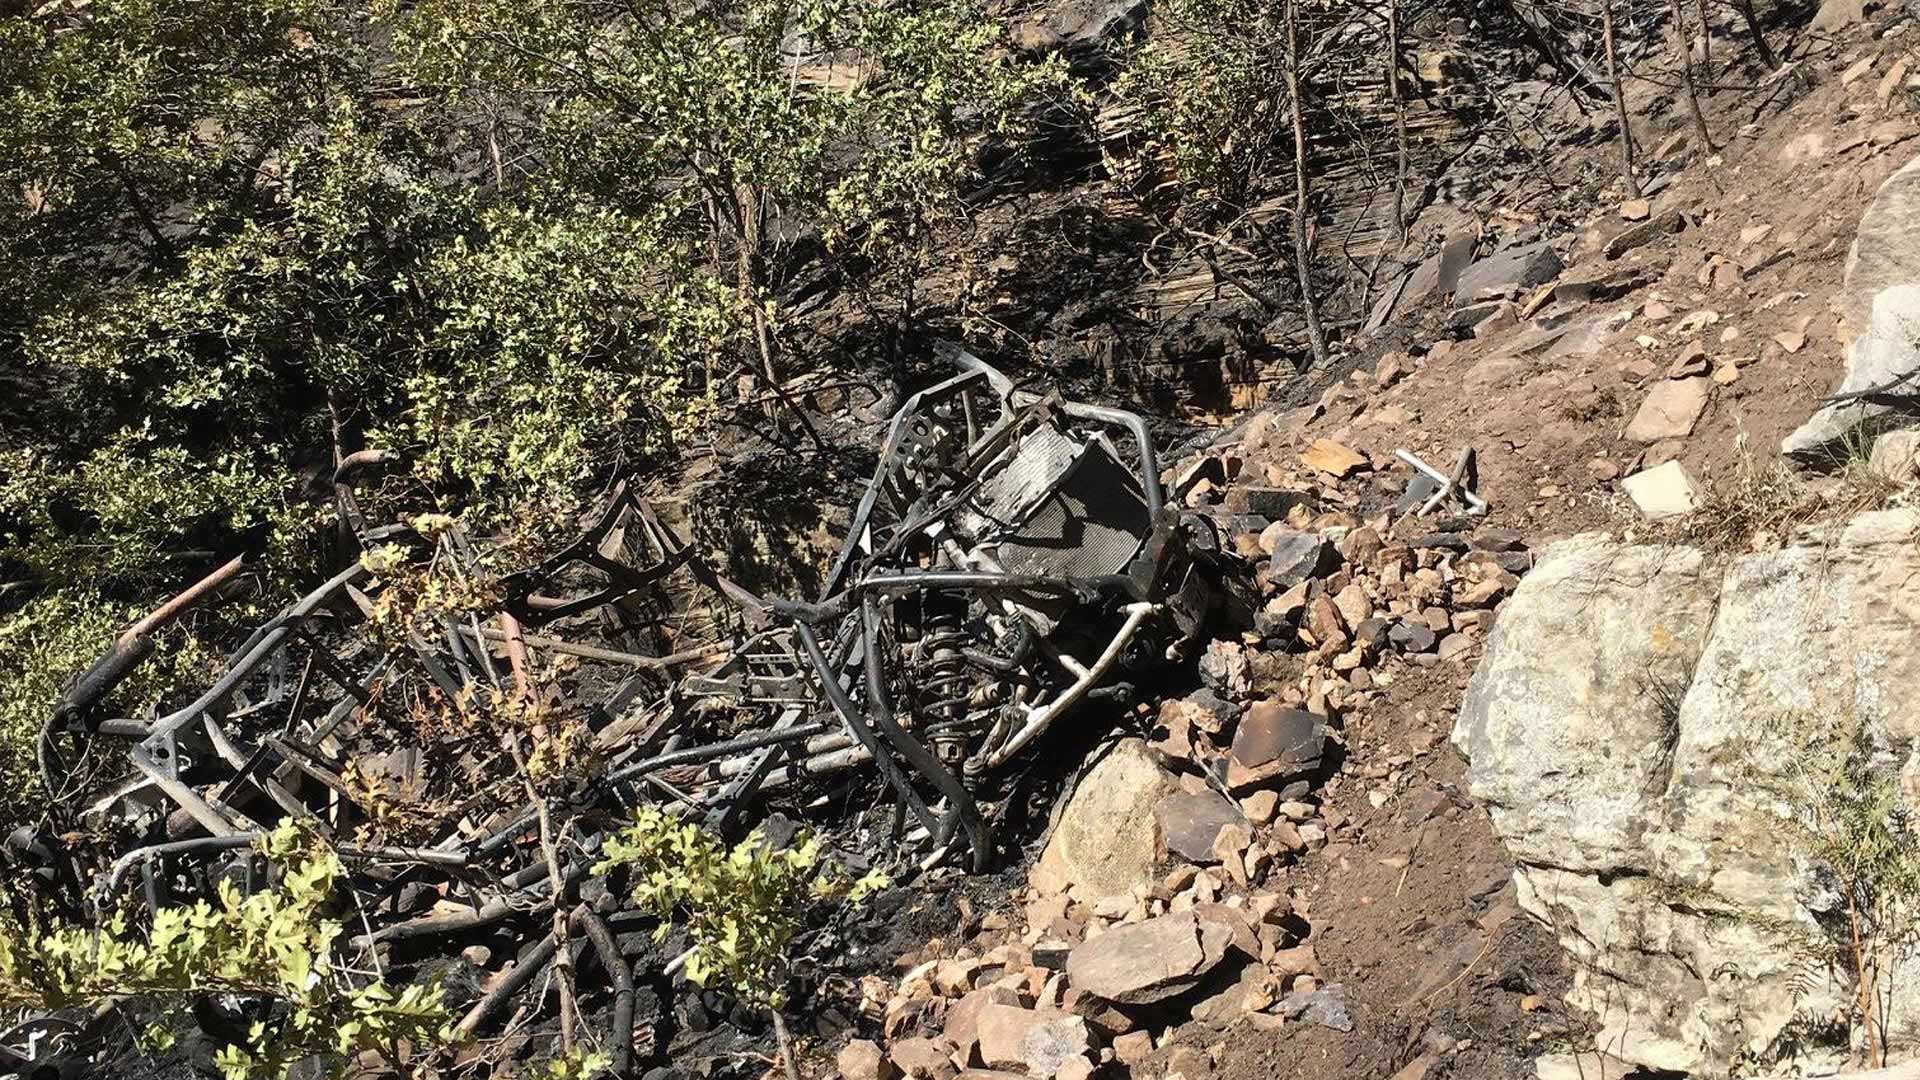 Wreckage of an ATV that plunged off a cliff in the Coconino National Forest, in the Blue Ridge area.